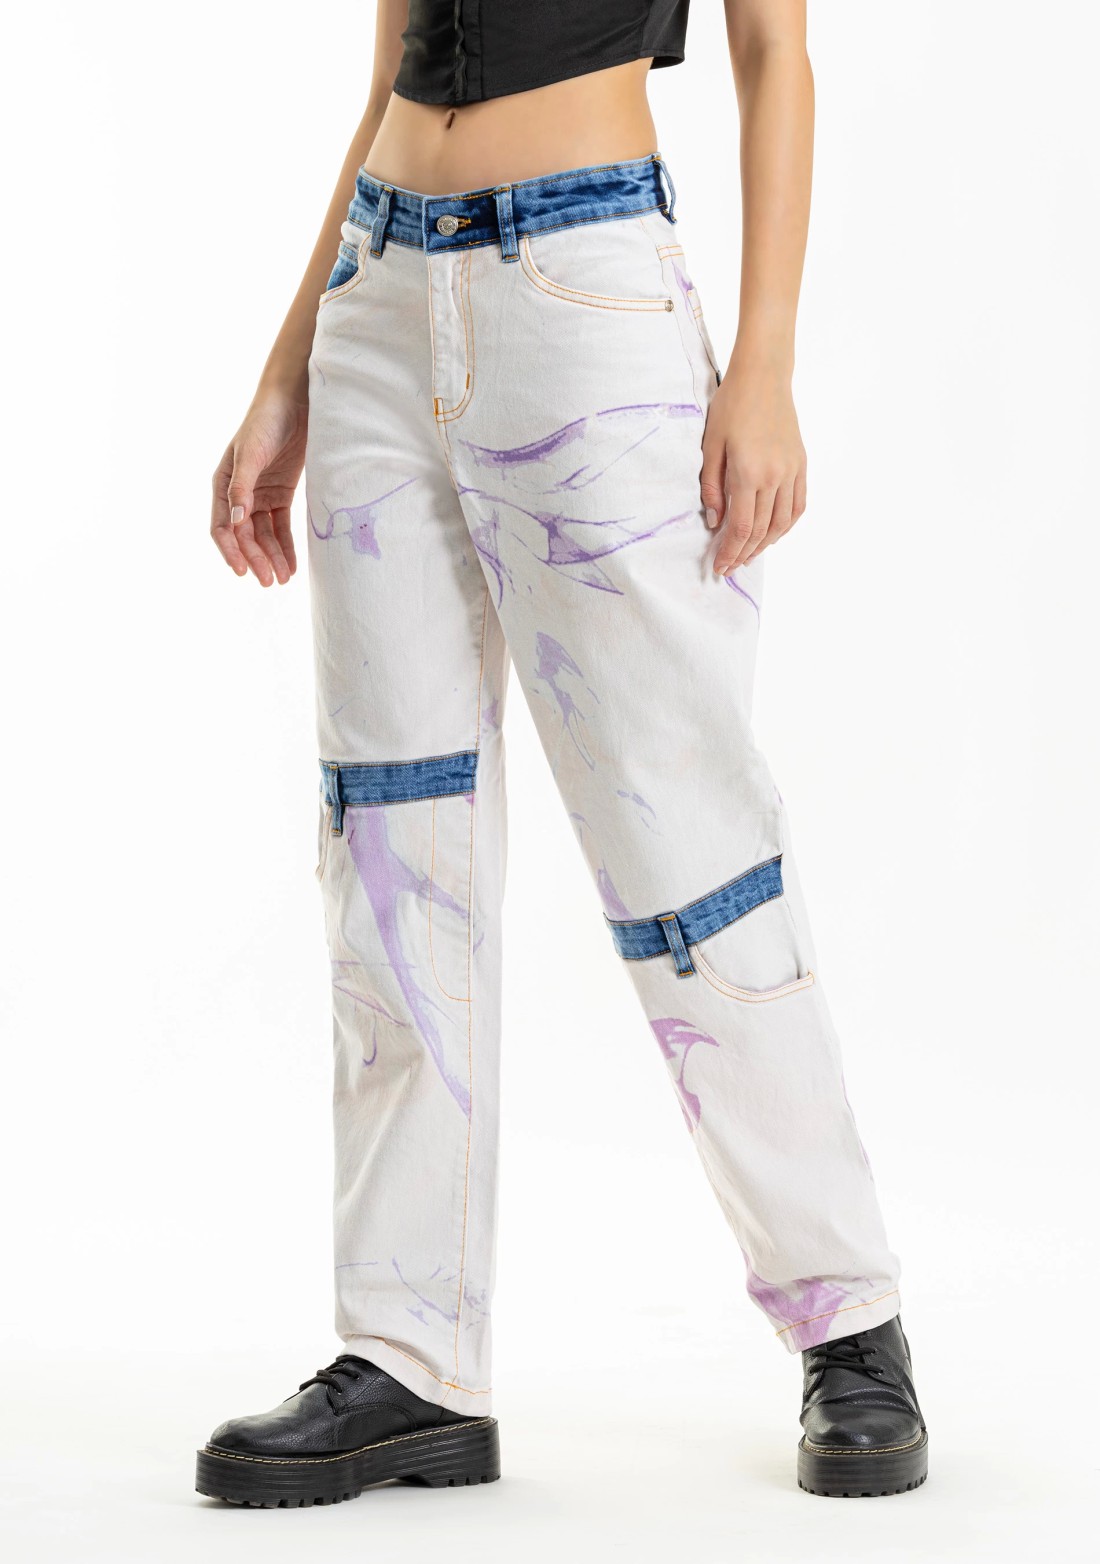 Off White Printed Straight Fit Rhysley Women's Jeans